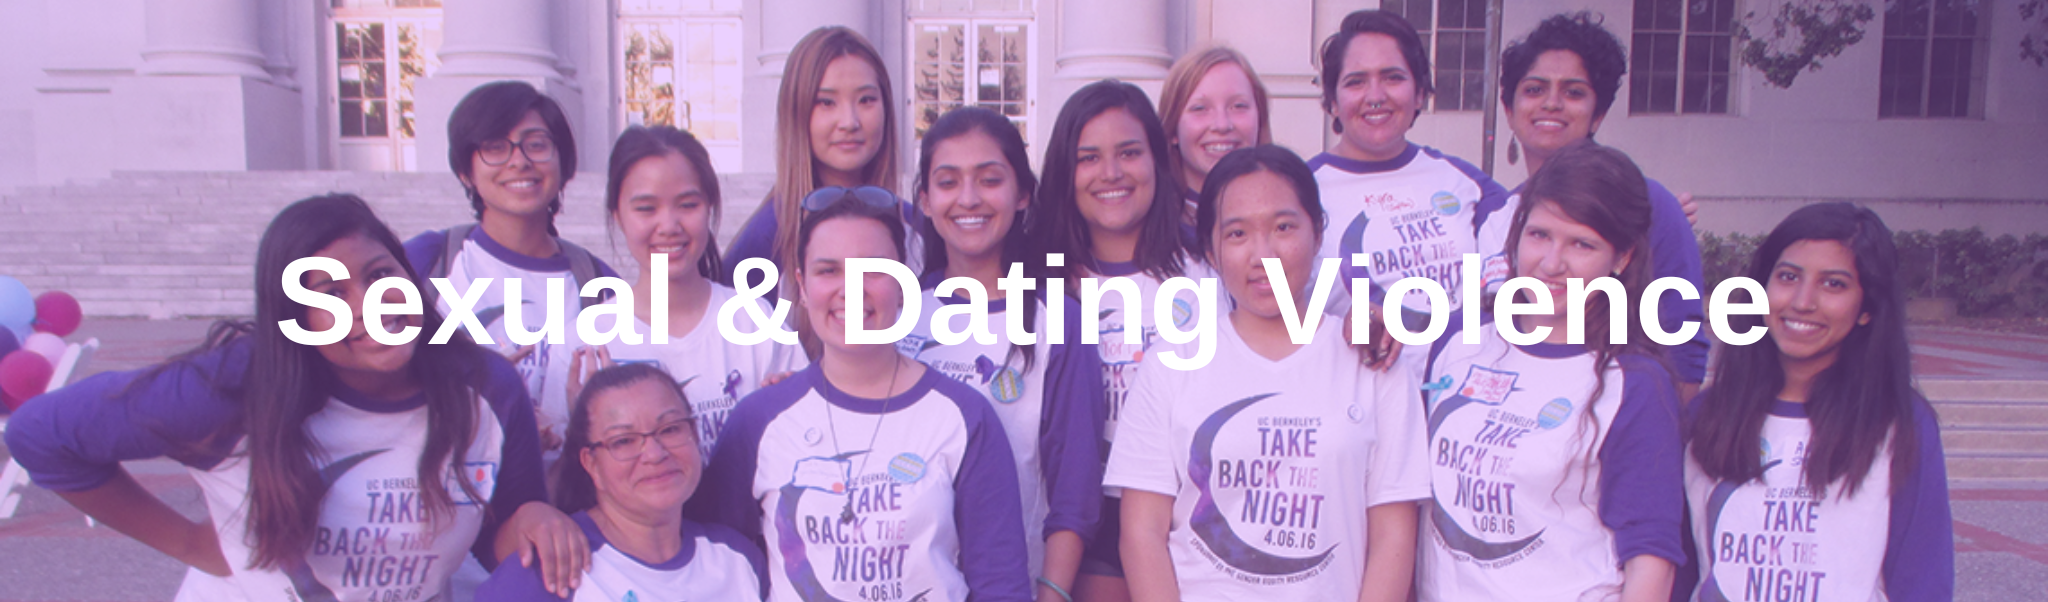 Sexual and Dating Violence Resource Bar. The image is of a variety of students at a Take Back the Night event wearing matching event shirts and smiling. The text on the image says "Sexual & Dating Violence" written in white. 